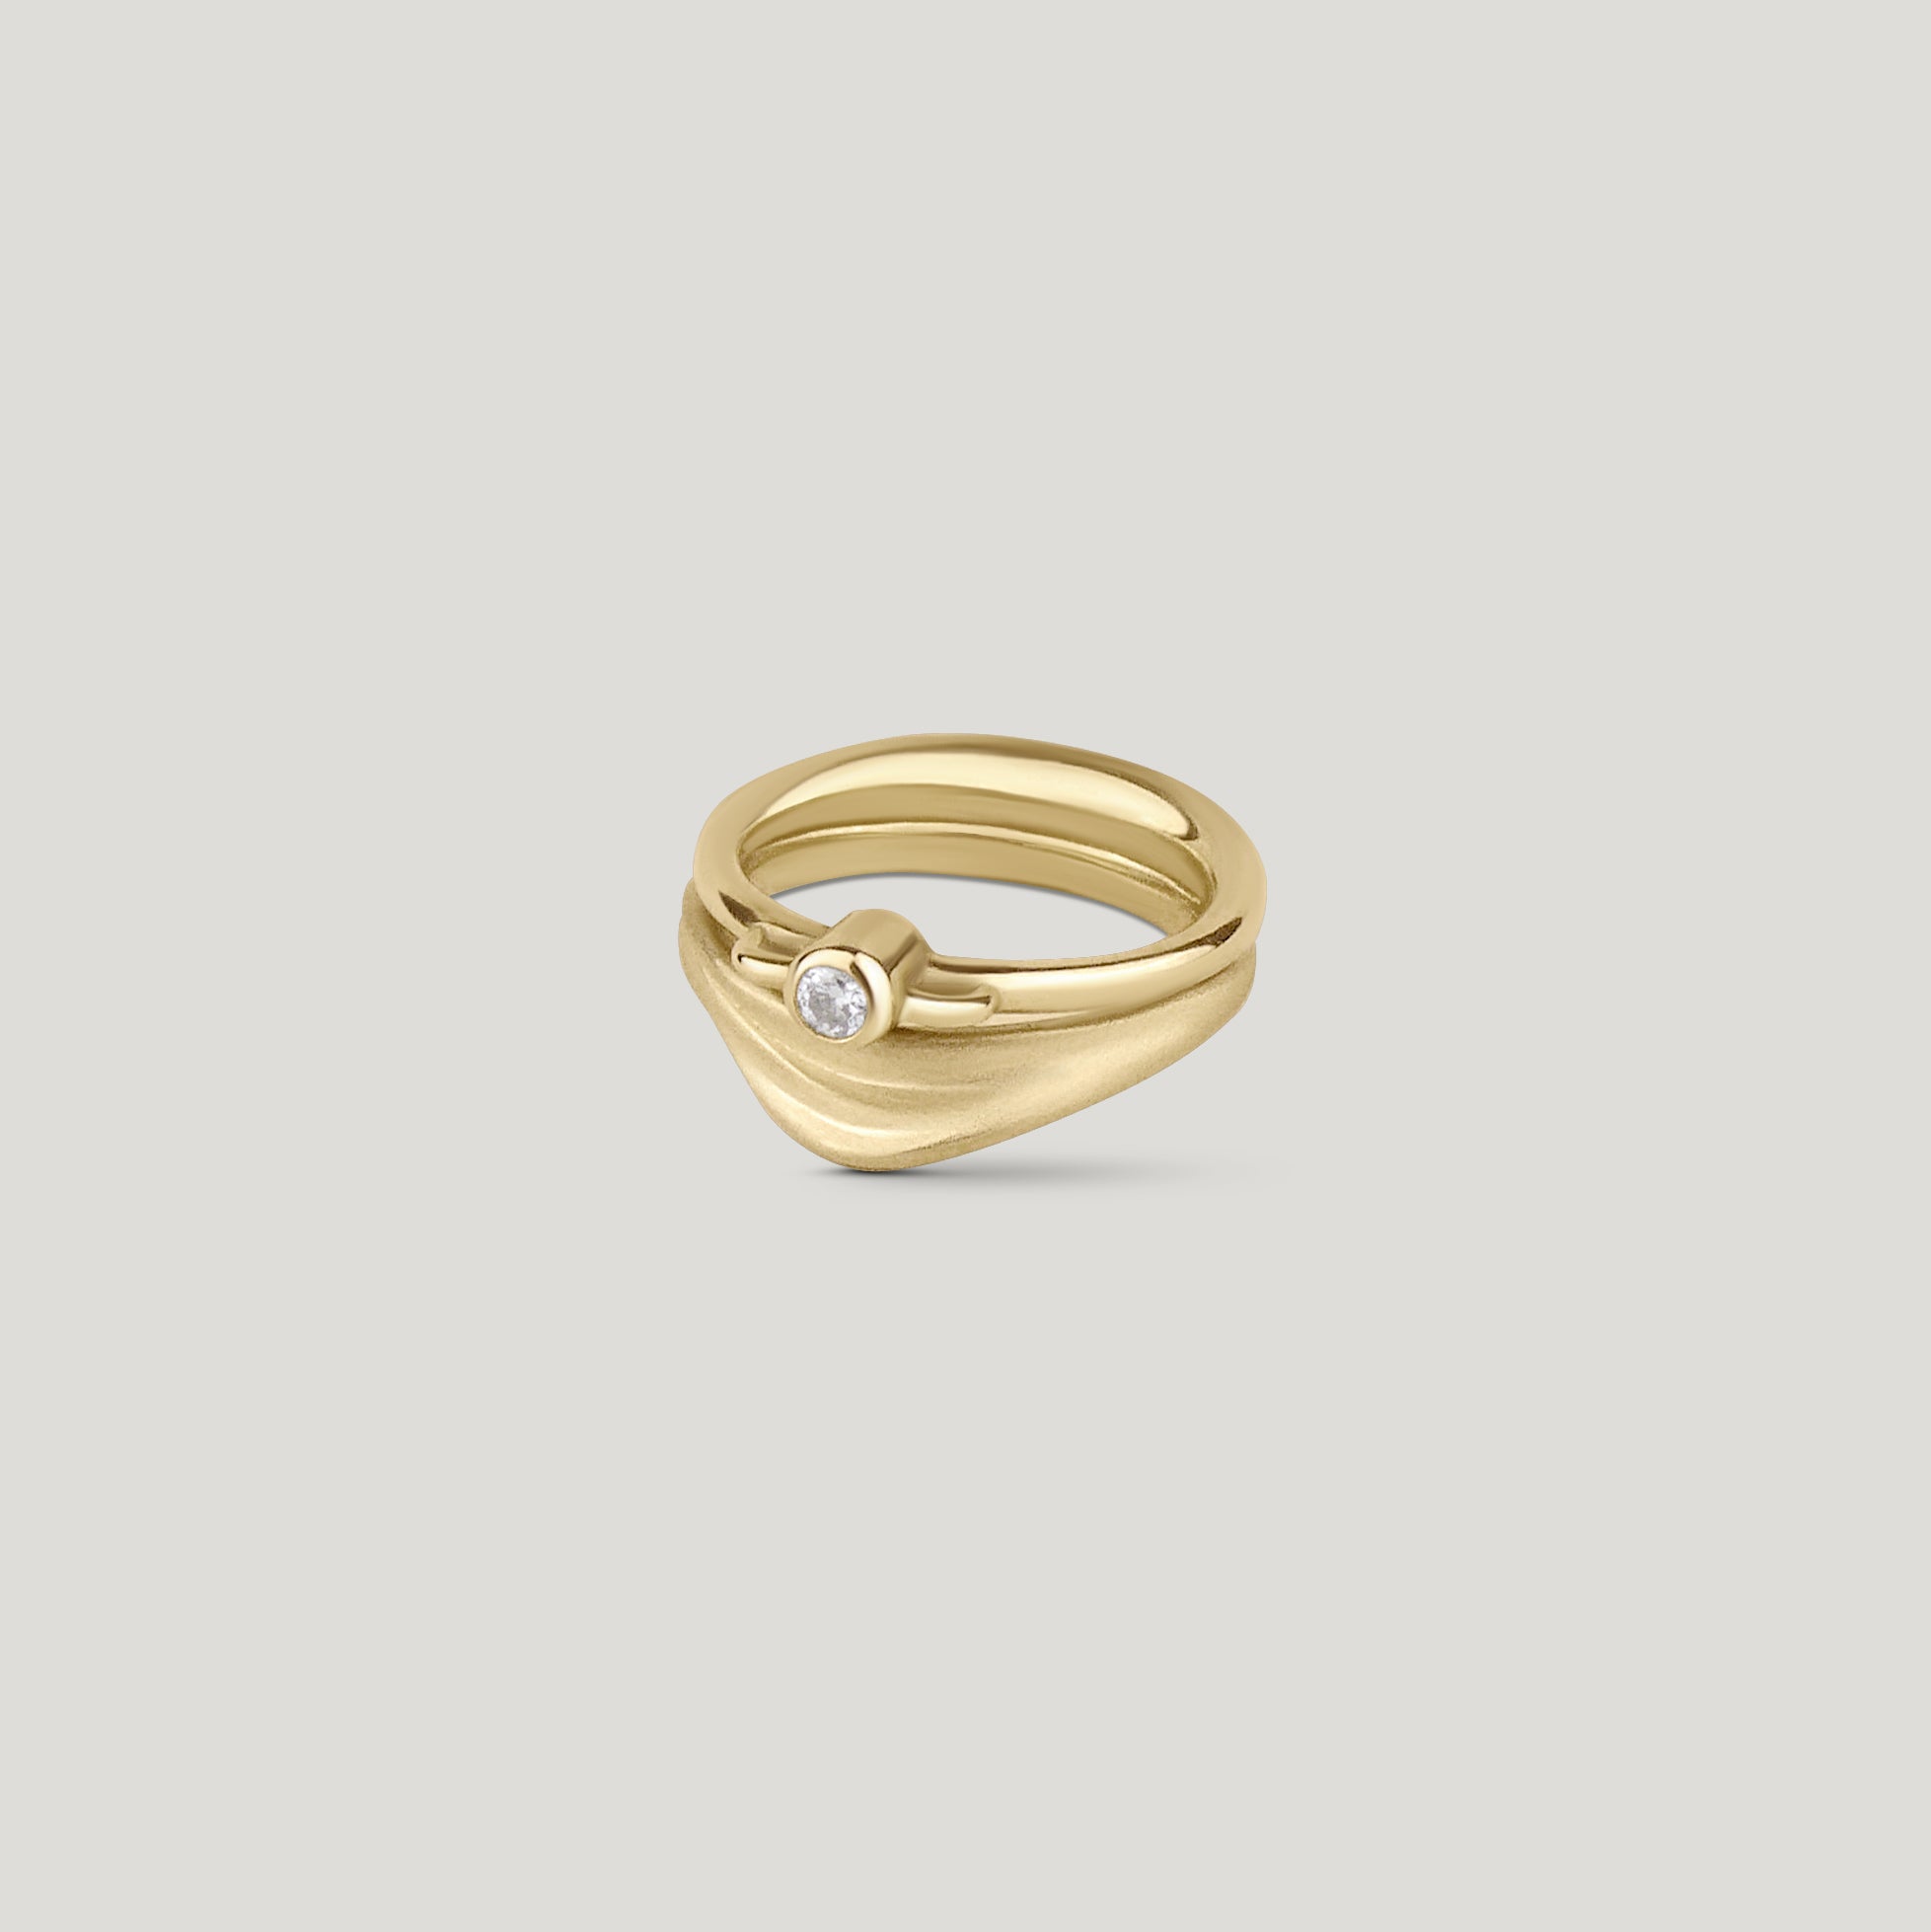 Curved dune gold wedding ring with organic texture stacked with diamond solitaire vessel ring